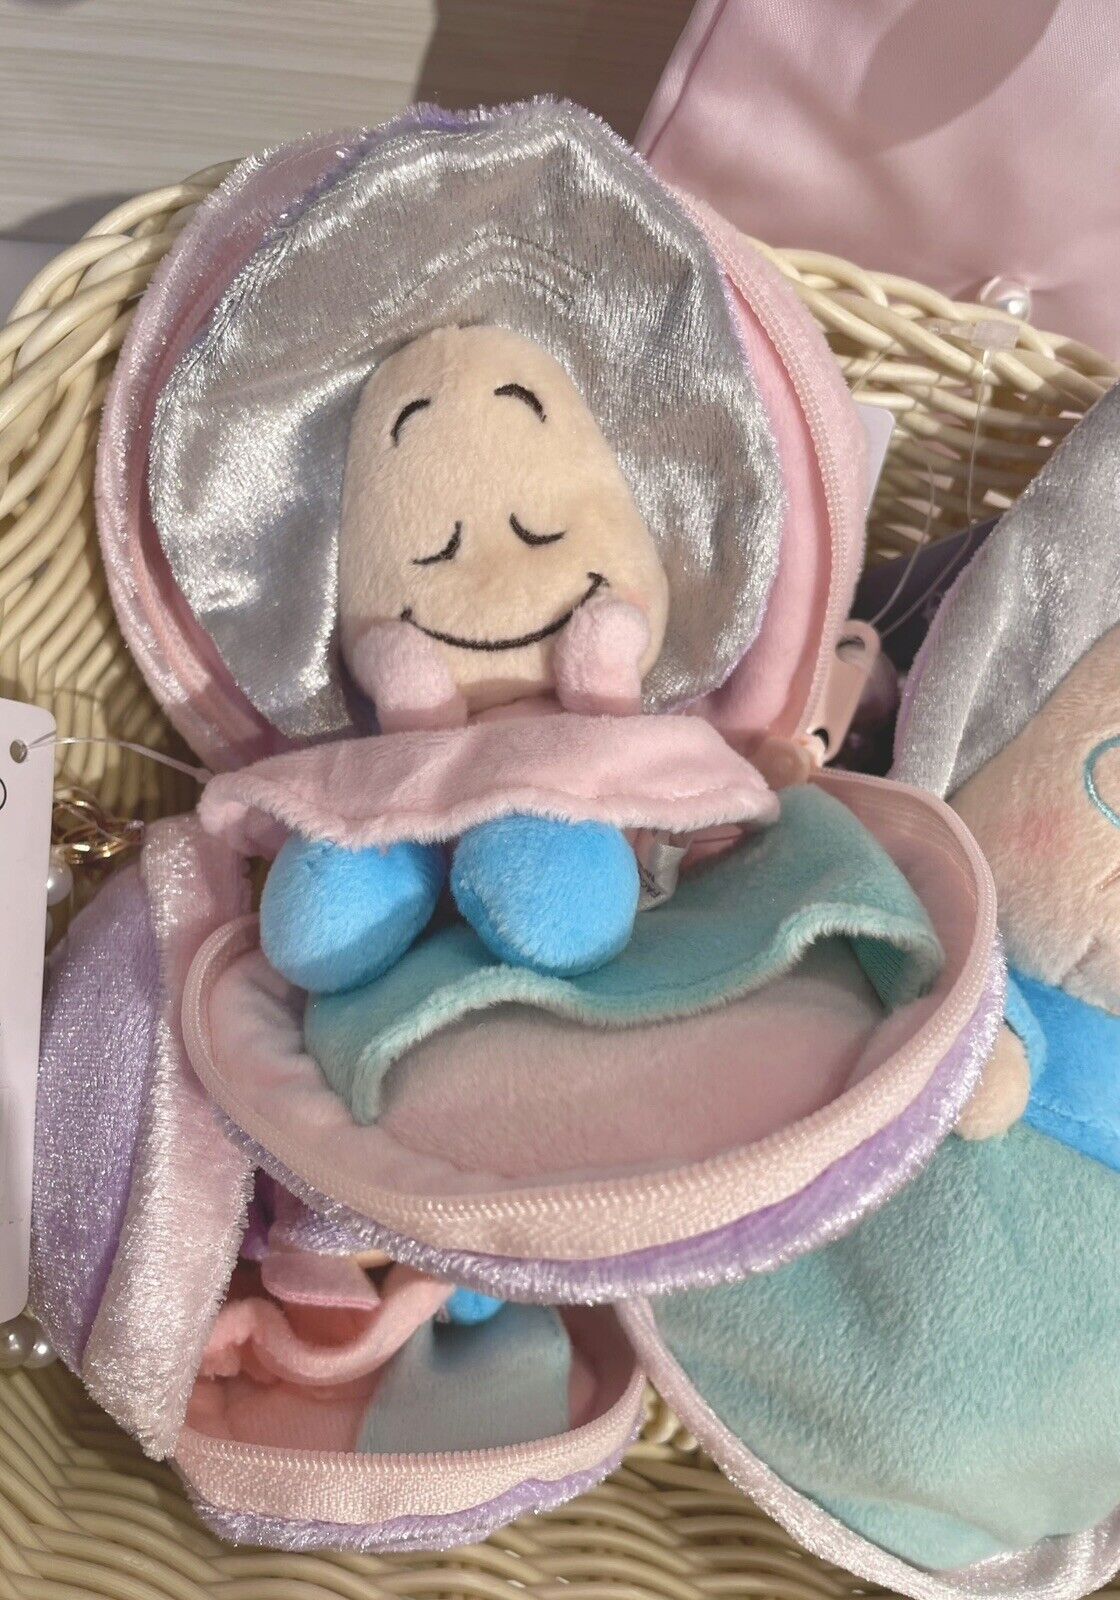 Japan Tokyo Disney Store Young Oyster Plush Toy Zipper Type Alice in Wonderland